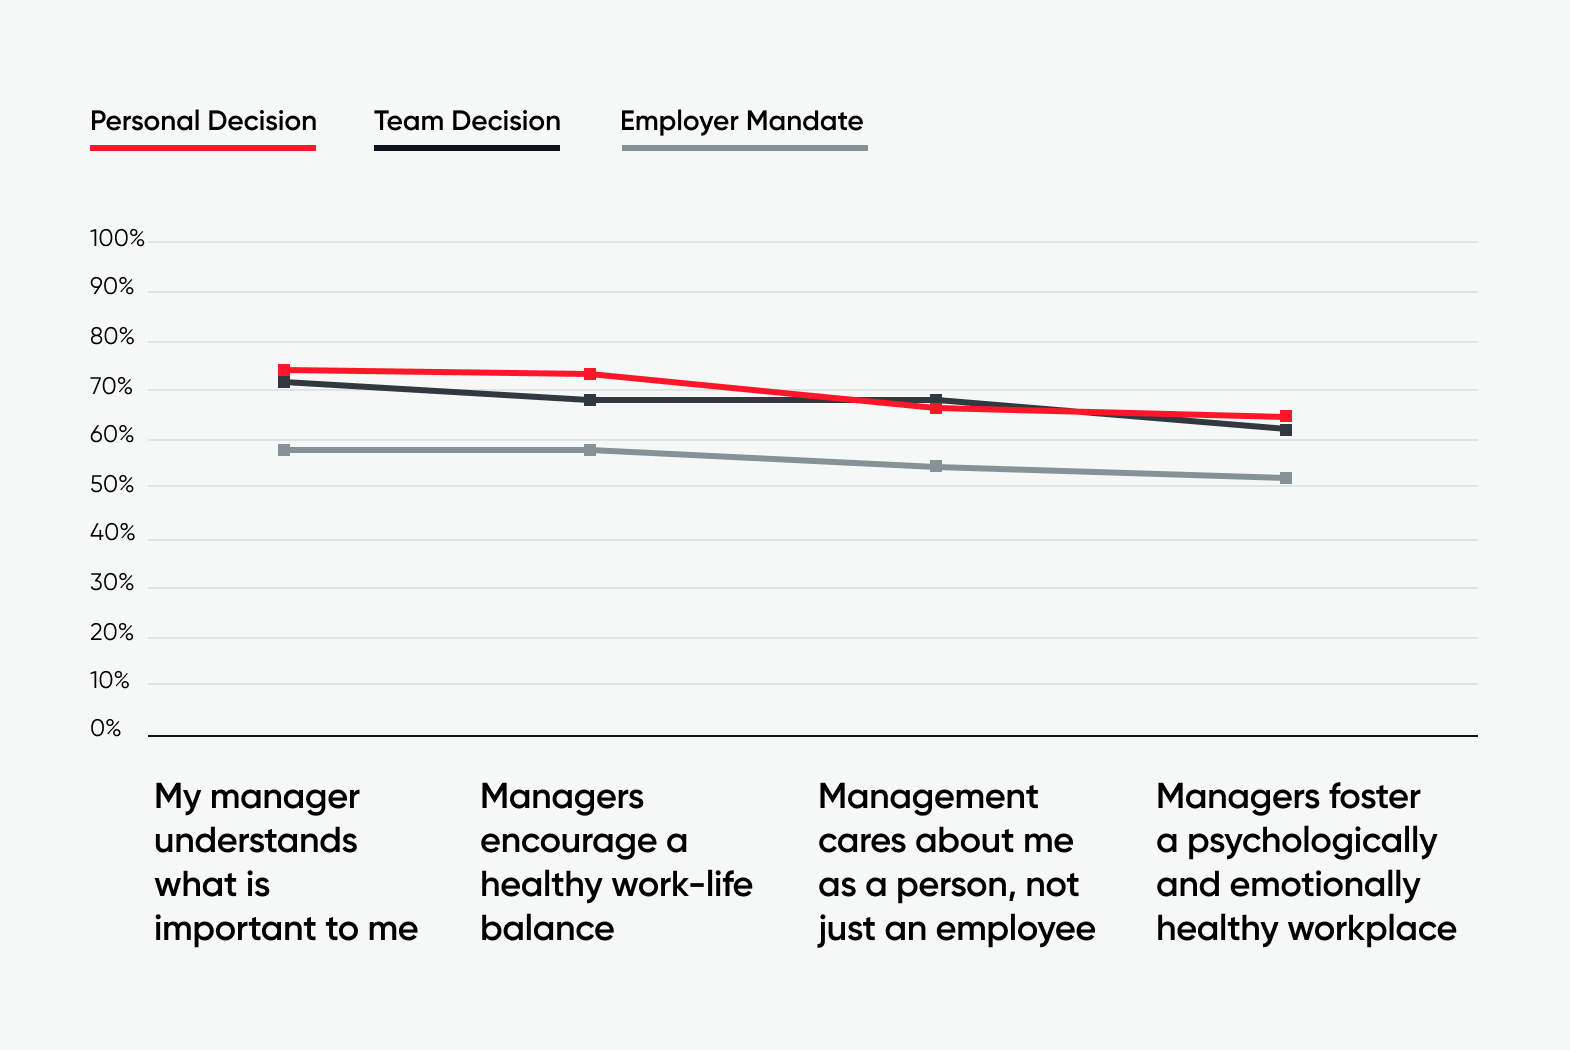 When employers issue mandates, employees’ relationship with their manager suffers